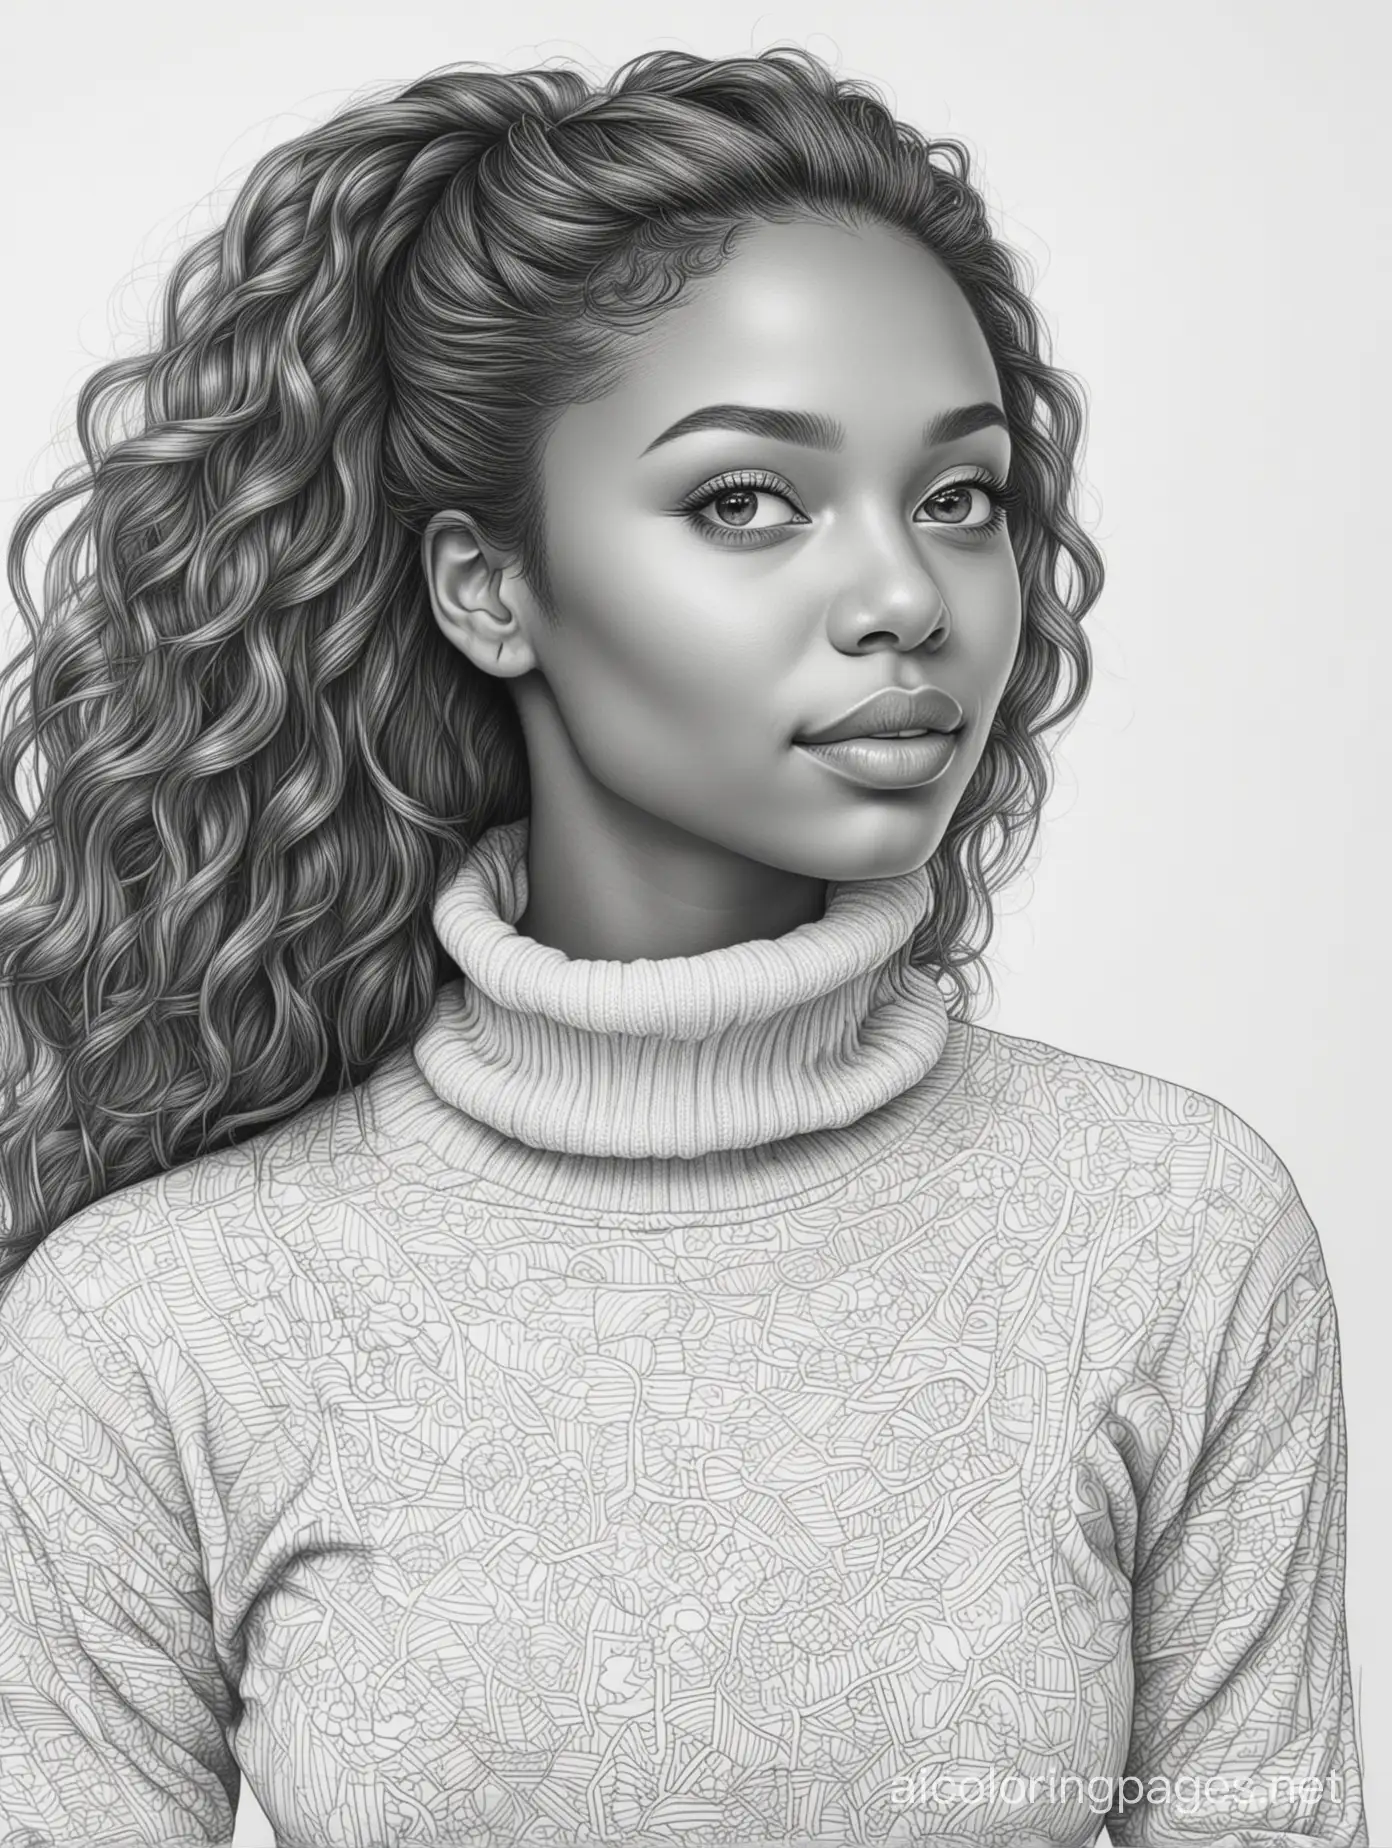 Pretty black woman with a turtle neck sweater long hair , Coloring Page, black and white, line art, white background, Simplicity, Ample White Space. The background of the coloring page is plain white to make it easy for young children to color within the lines. The outlines of all the subjects are easy to distinguish, making it simple for kids to color without too much difficulty